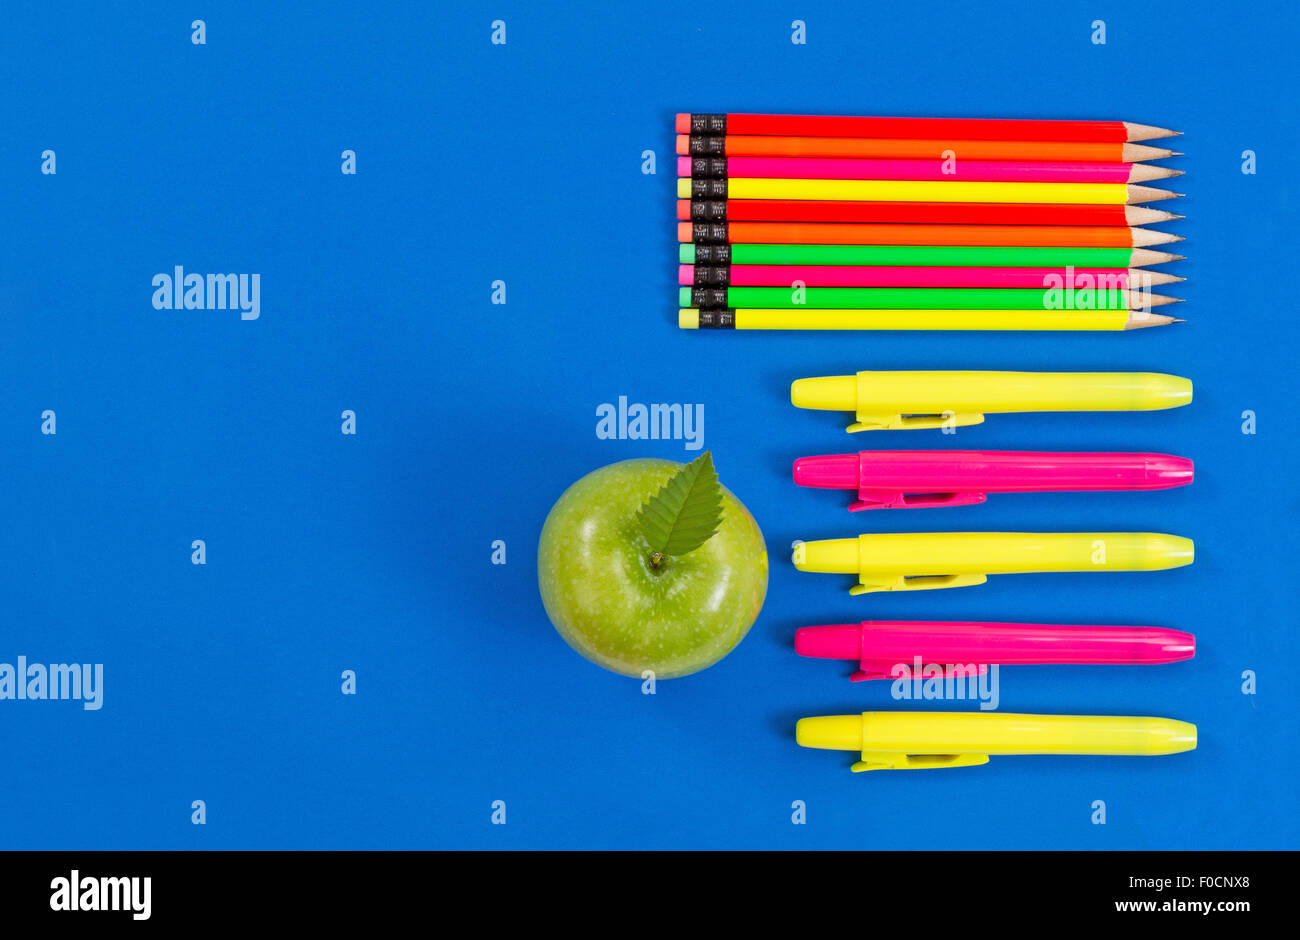 Office or back to school supplies consisting of a green apple, highlight markers and colorful pencils on blue background. Stock Photo